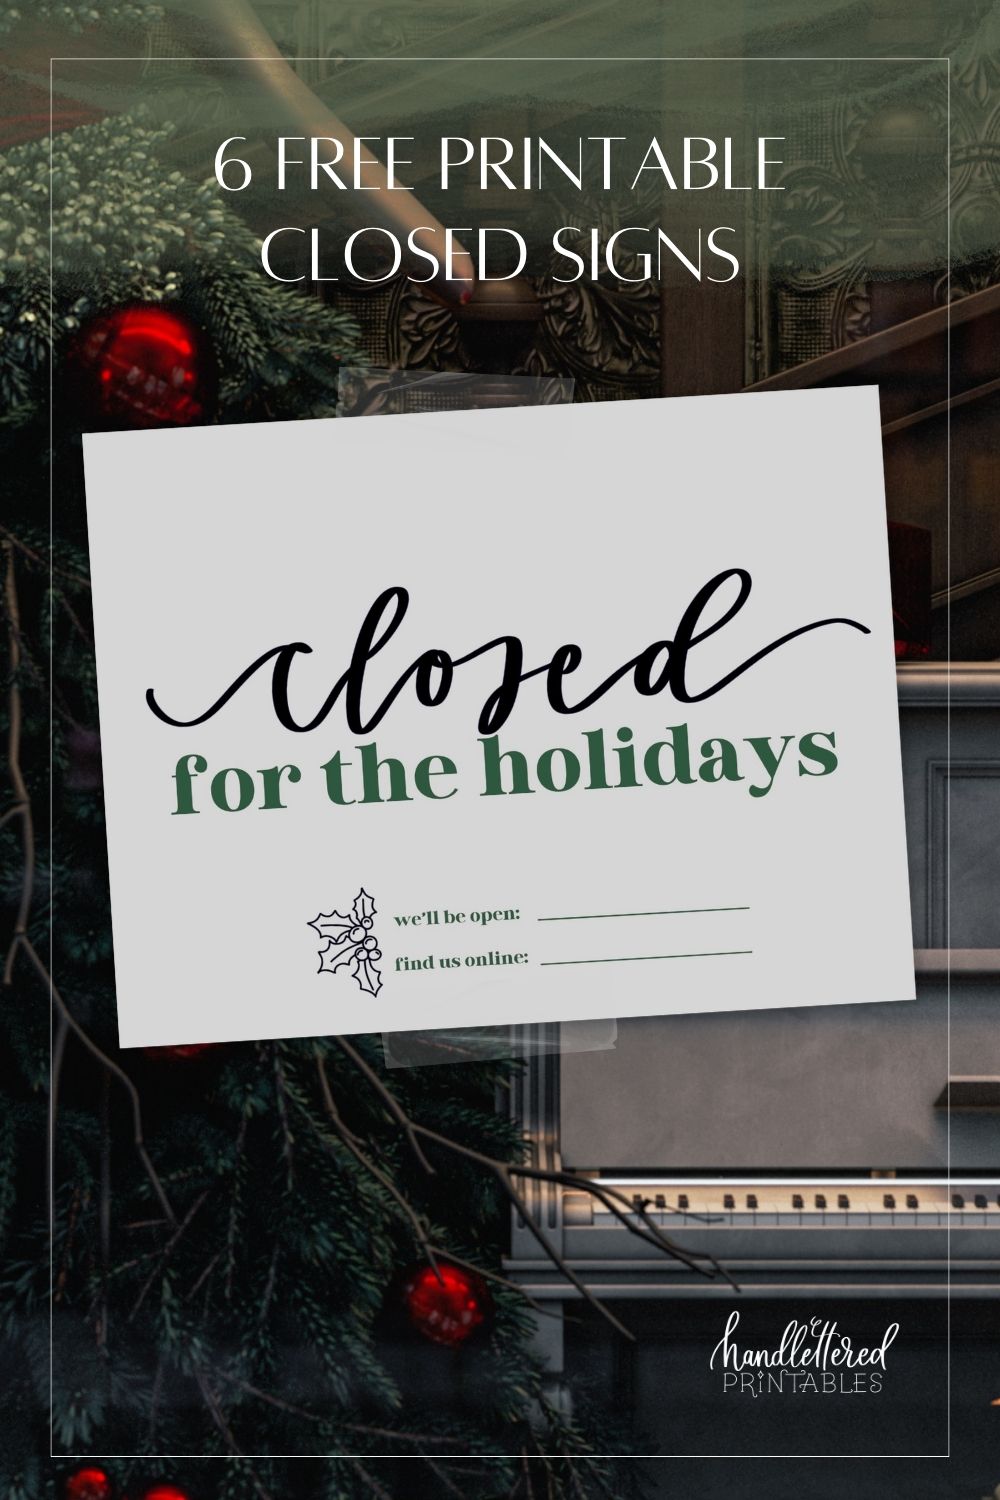 Free printable closed for the holidays signage shown in store window with text over